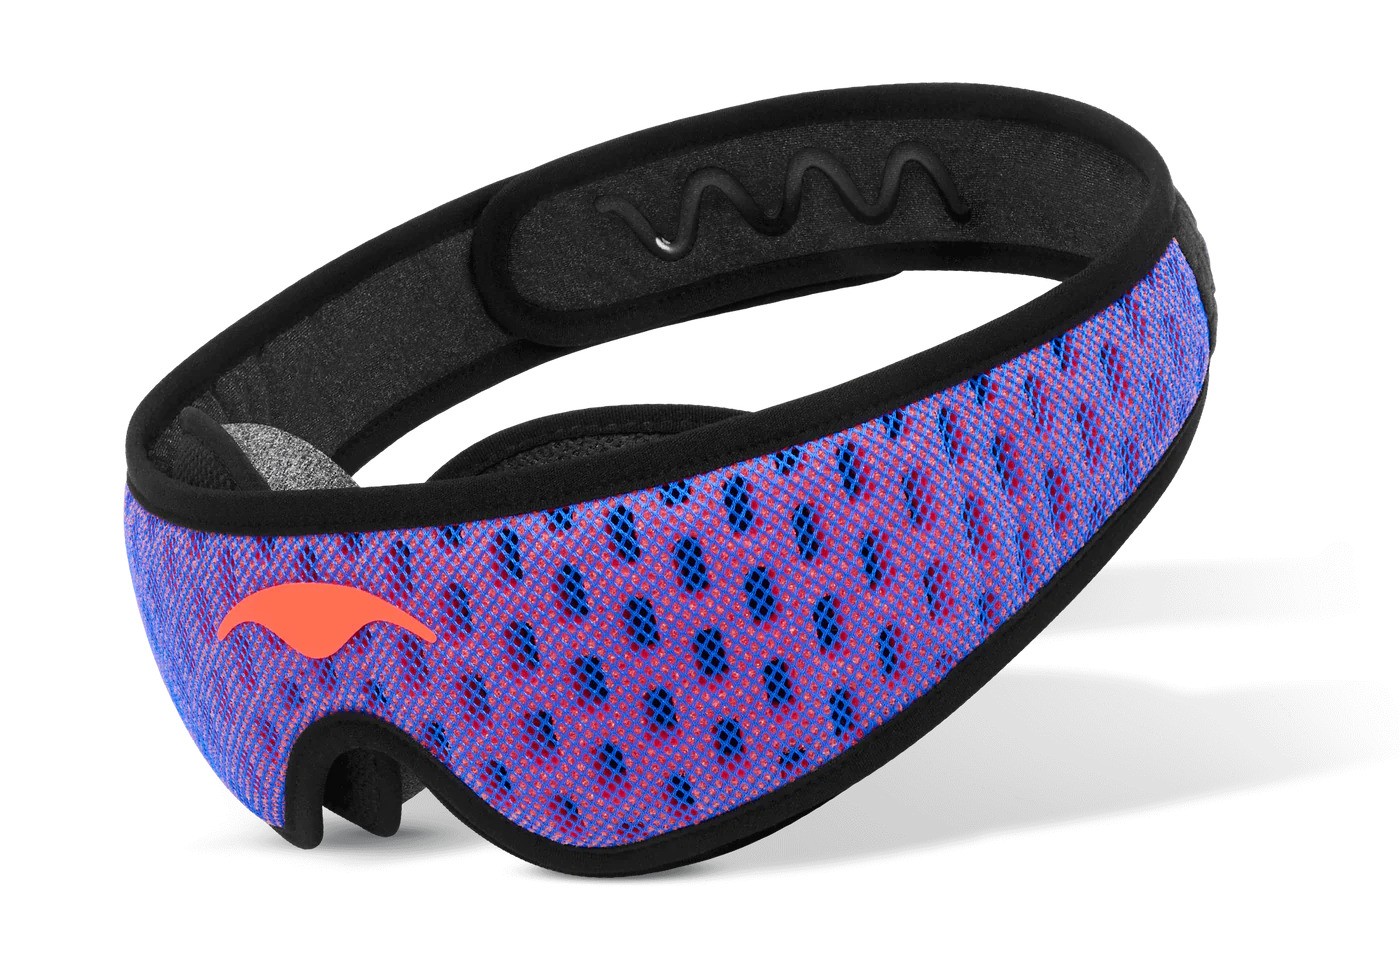 A blue mesh sleep mask with eye cups made especially for side sleepers.